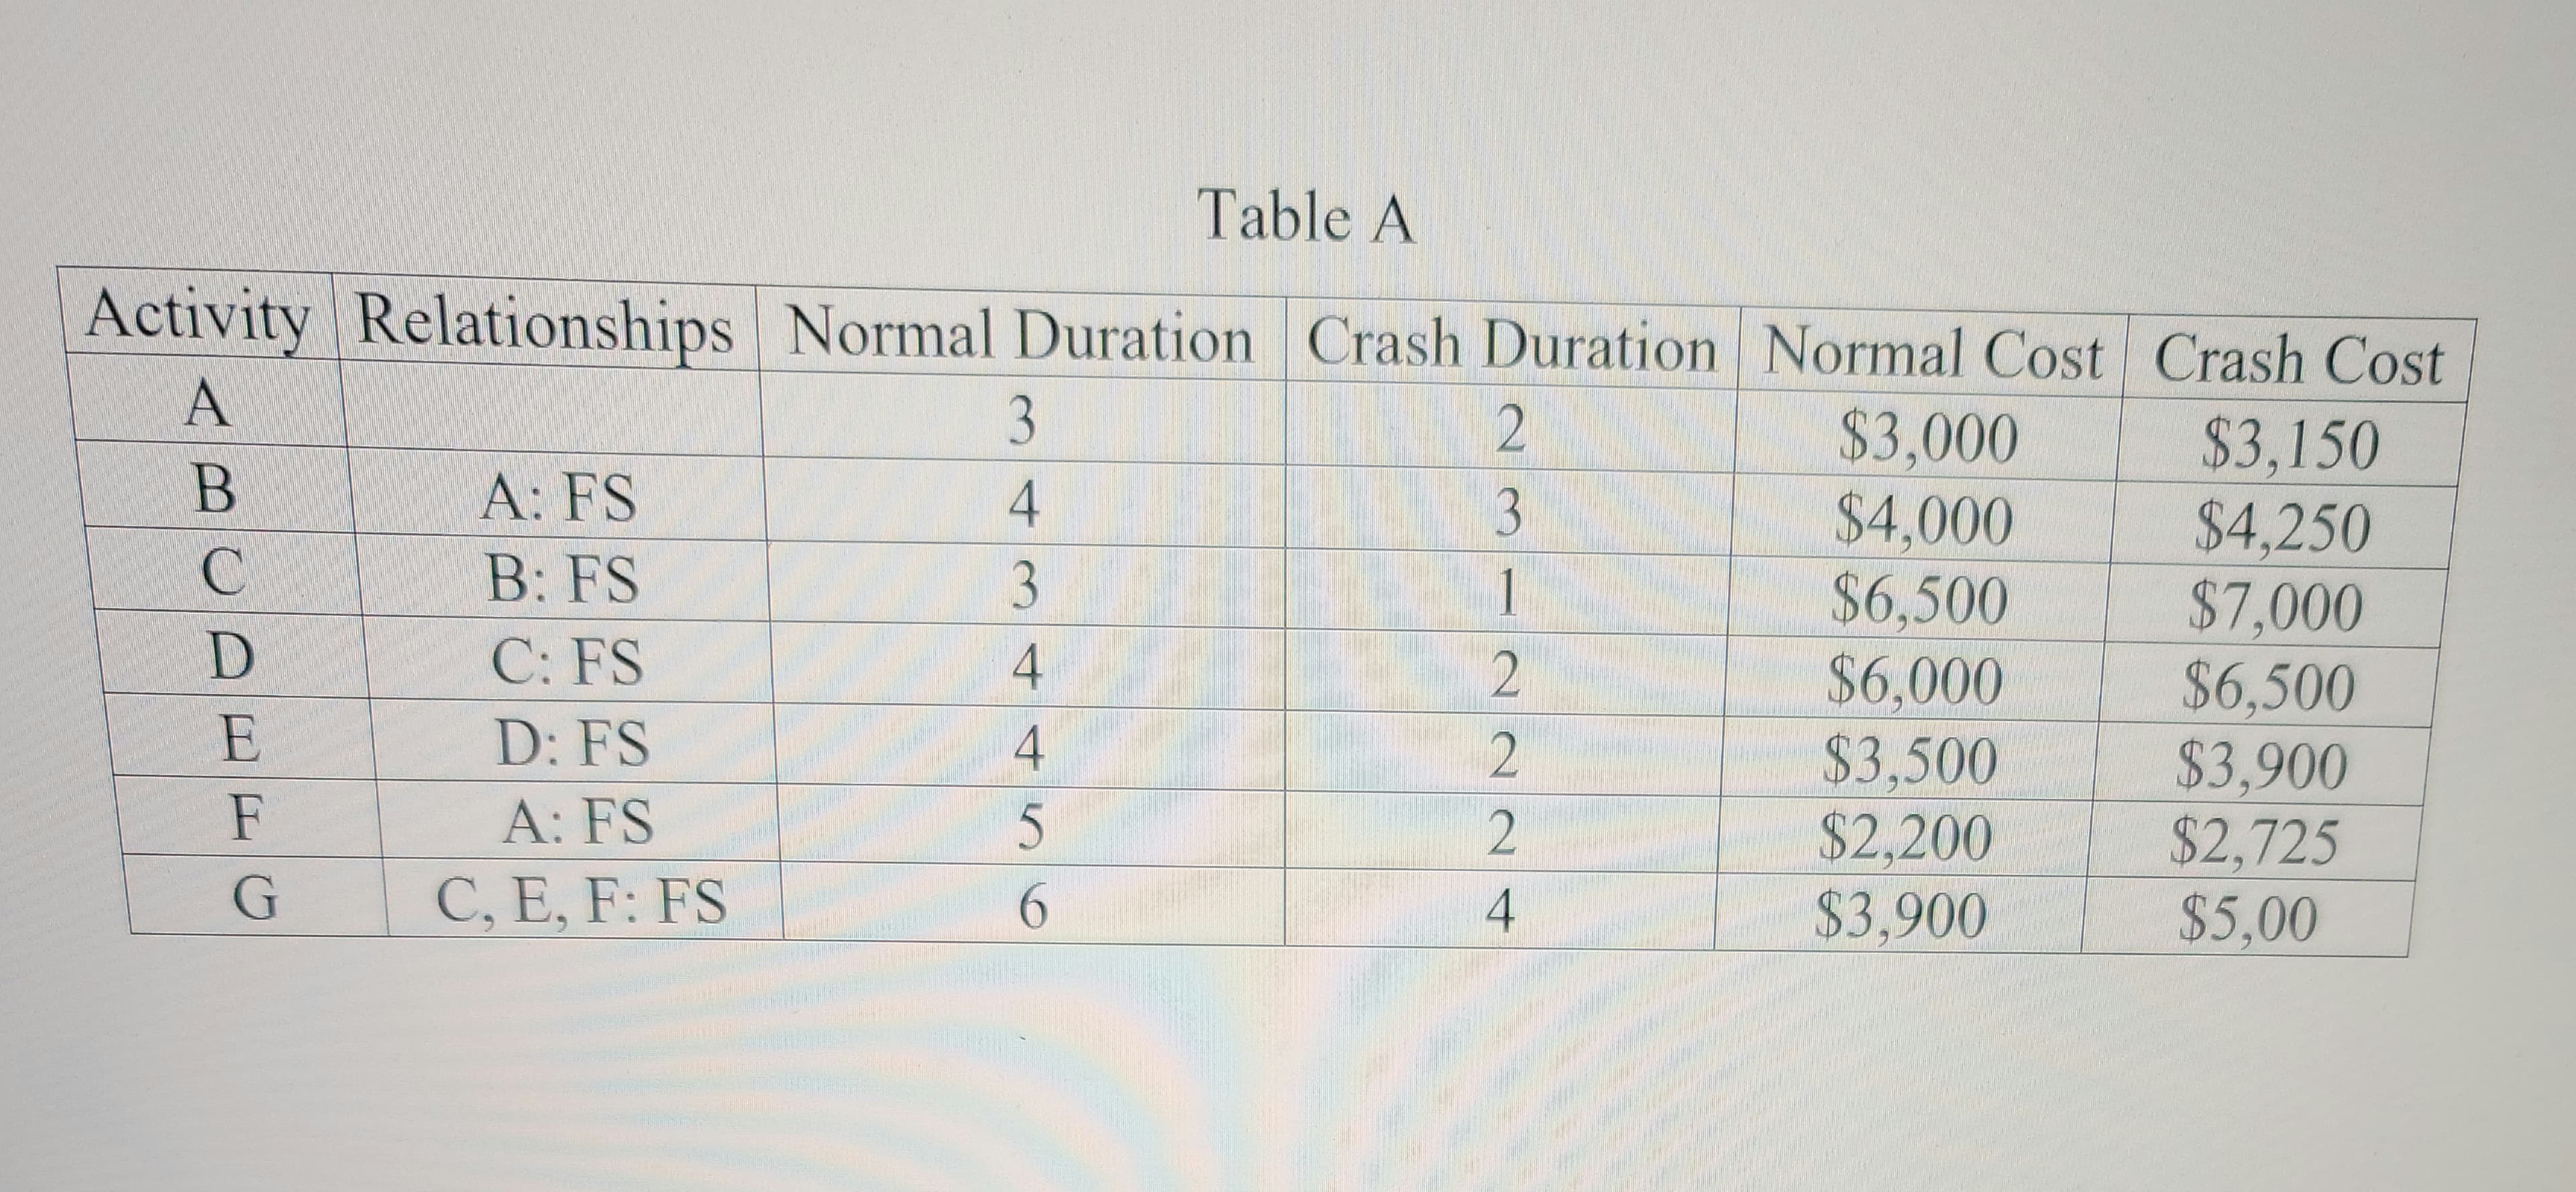 Table A
Activity Relationships Normal Duration Crash Duration Normal Cost Crash Cost
A
B
C
D
F
F
G
A: FS
B: FS
C: FS
D: FS
A: FS
C, E, F: FS
3
4
3
4
4
5
6
2
3
1
2
2
2
4
$3,000
$4,000
$6,500
$6,000
$3,500
$2,200
$3,900
$3.150
$4,250
$7,000
$6,500
$3,900
$2,725
$5,00